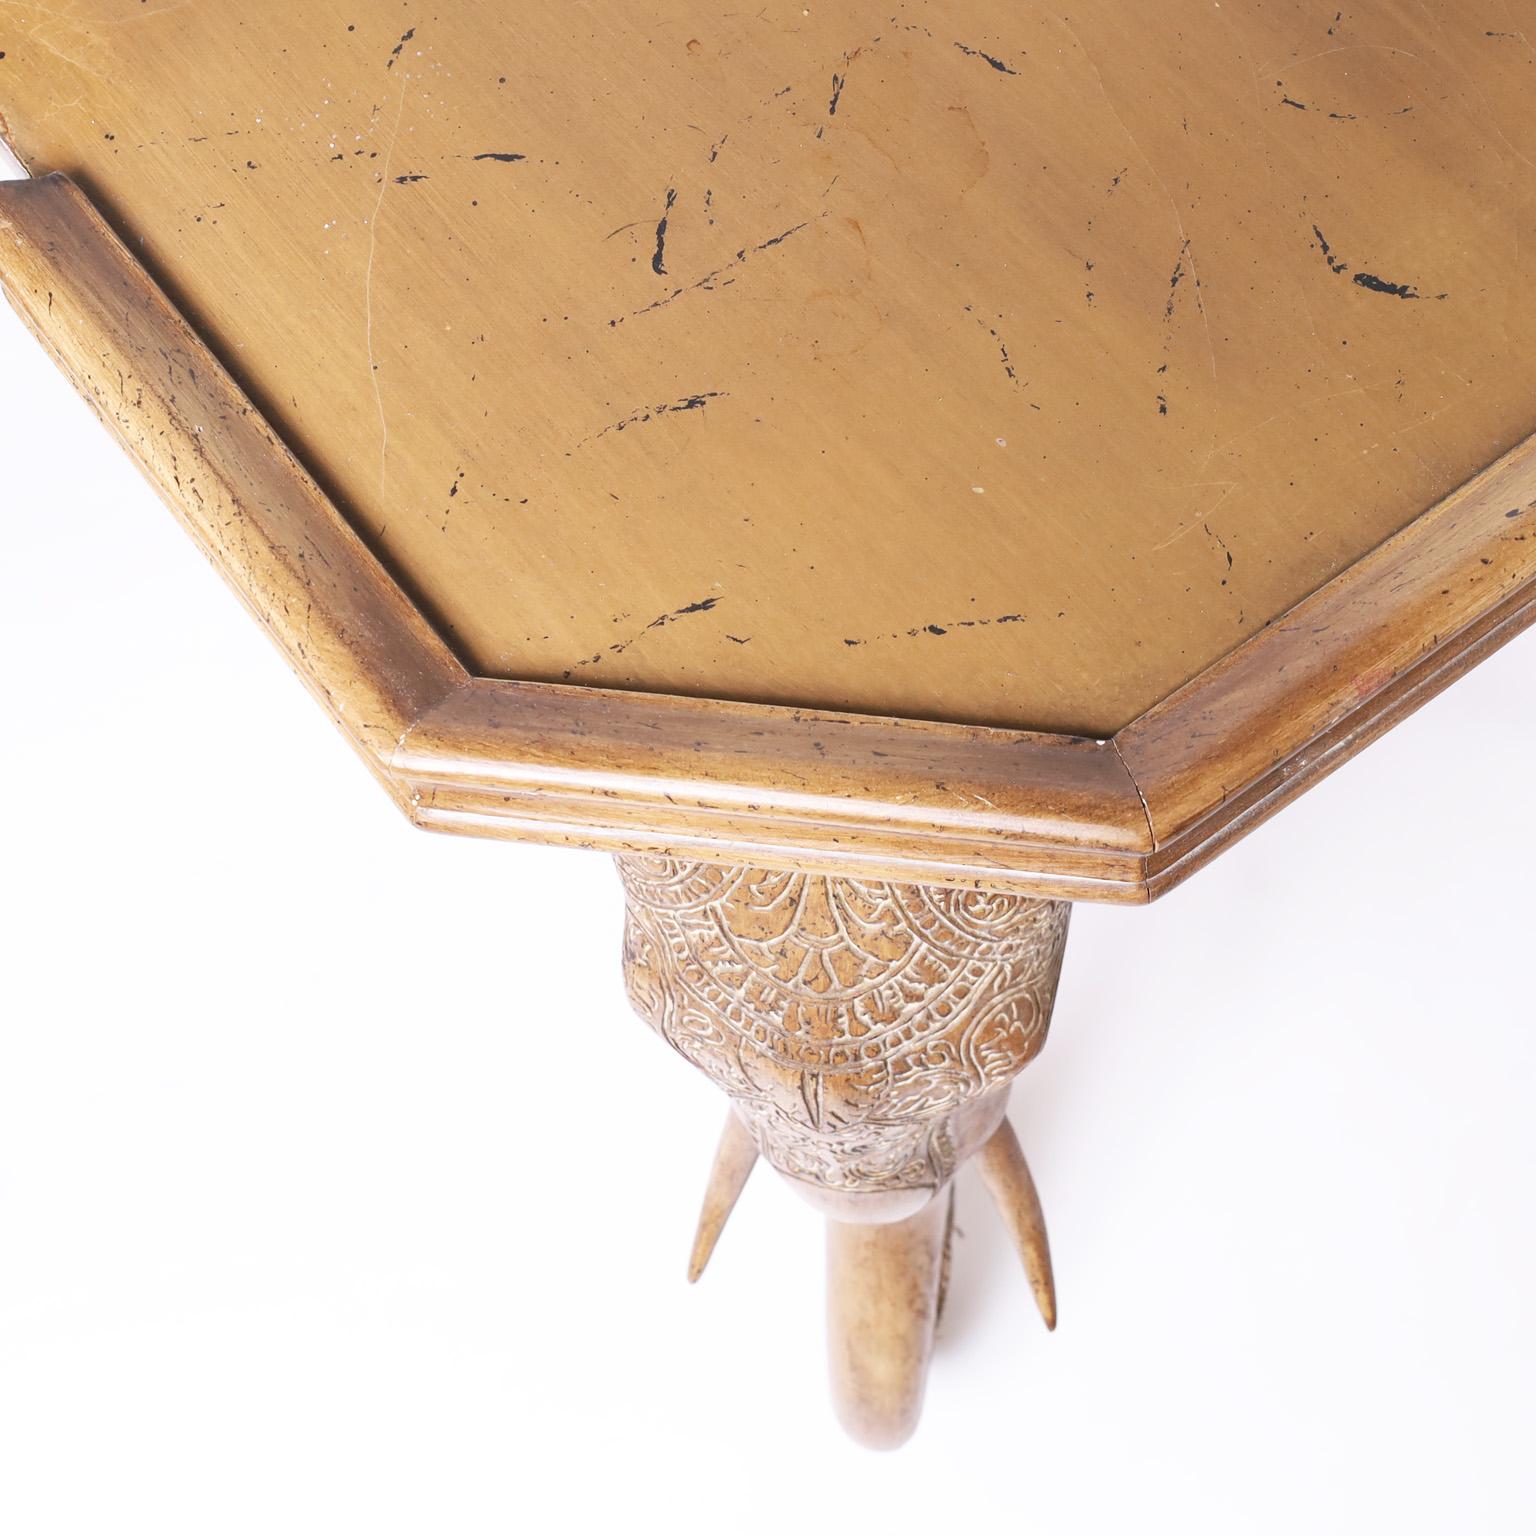 British Colonial Elephant Head Writing Desk In Good Condition For Sale In Palm Beach, FL